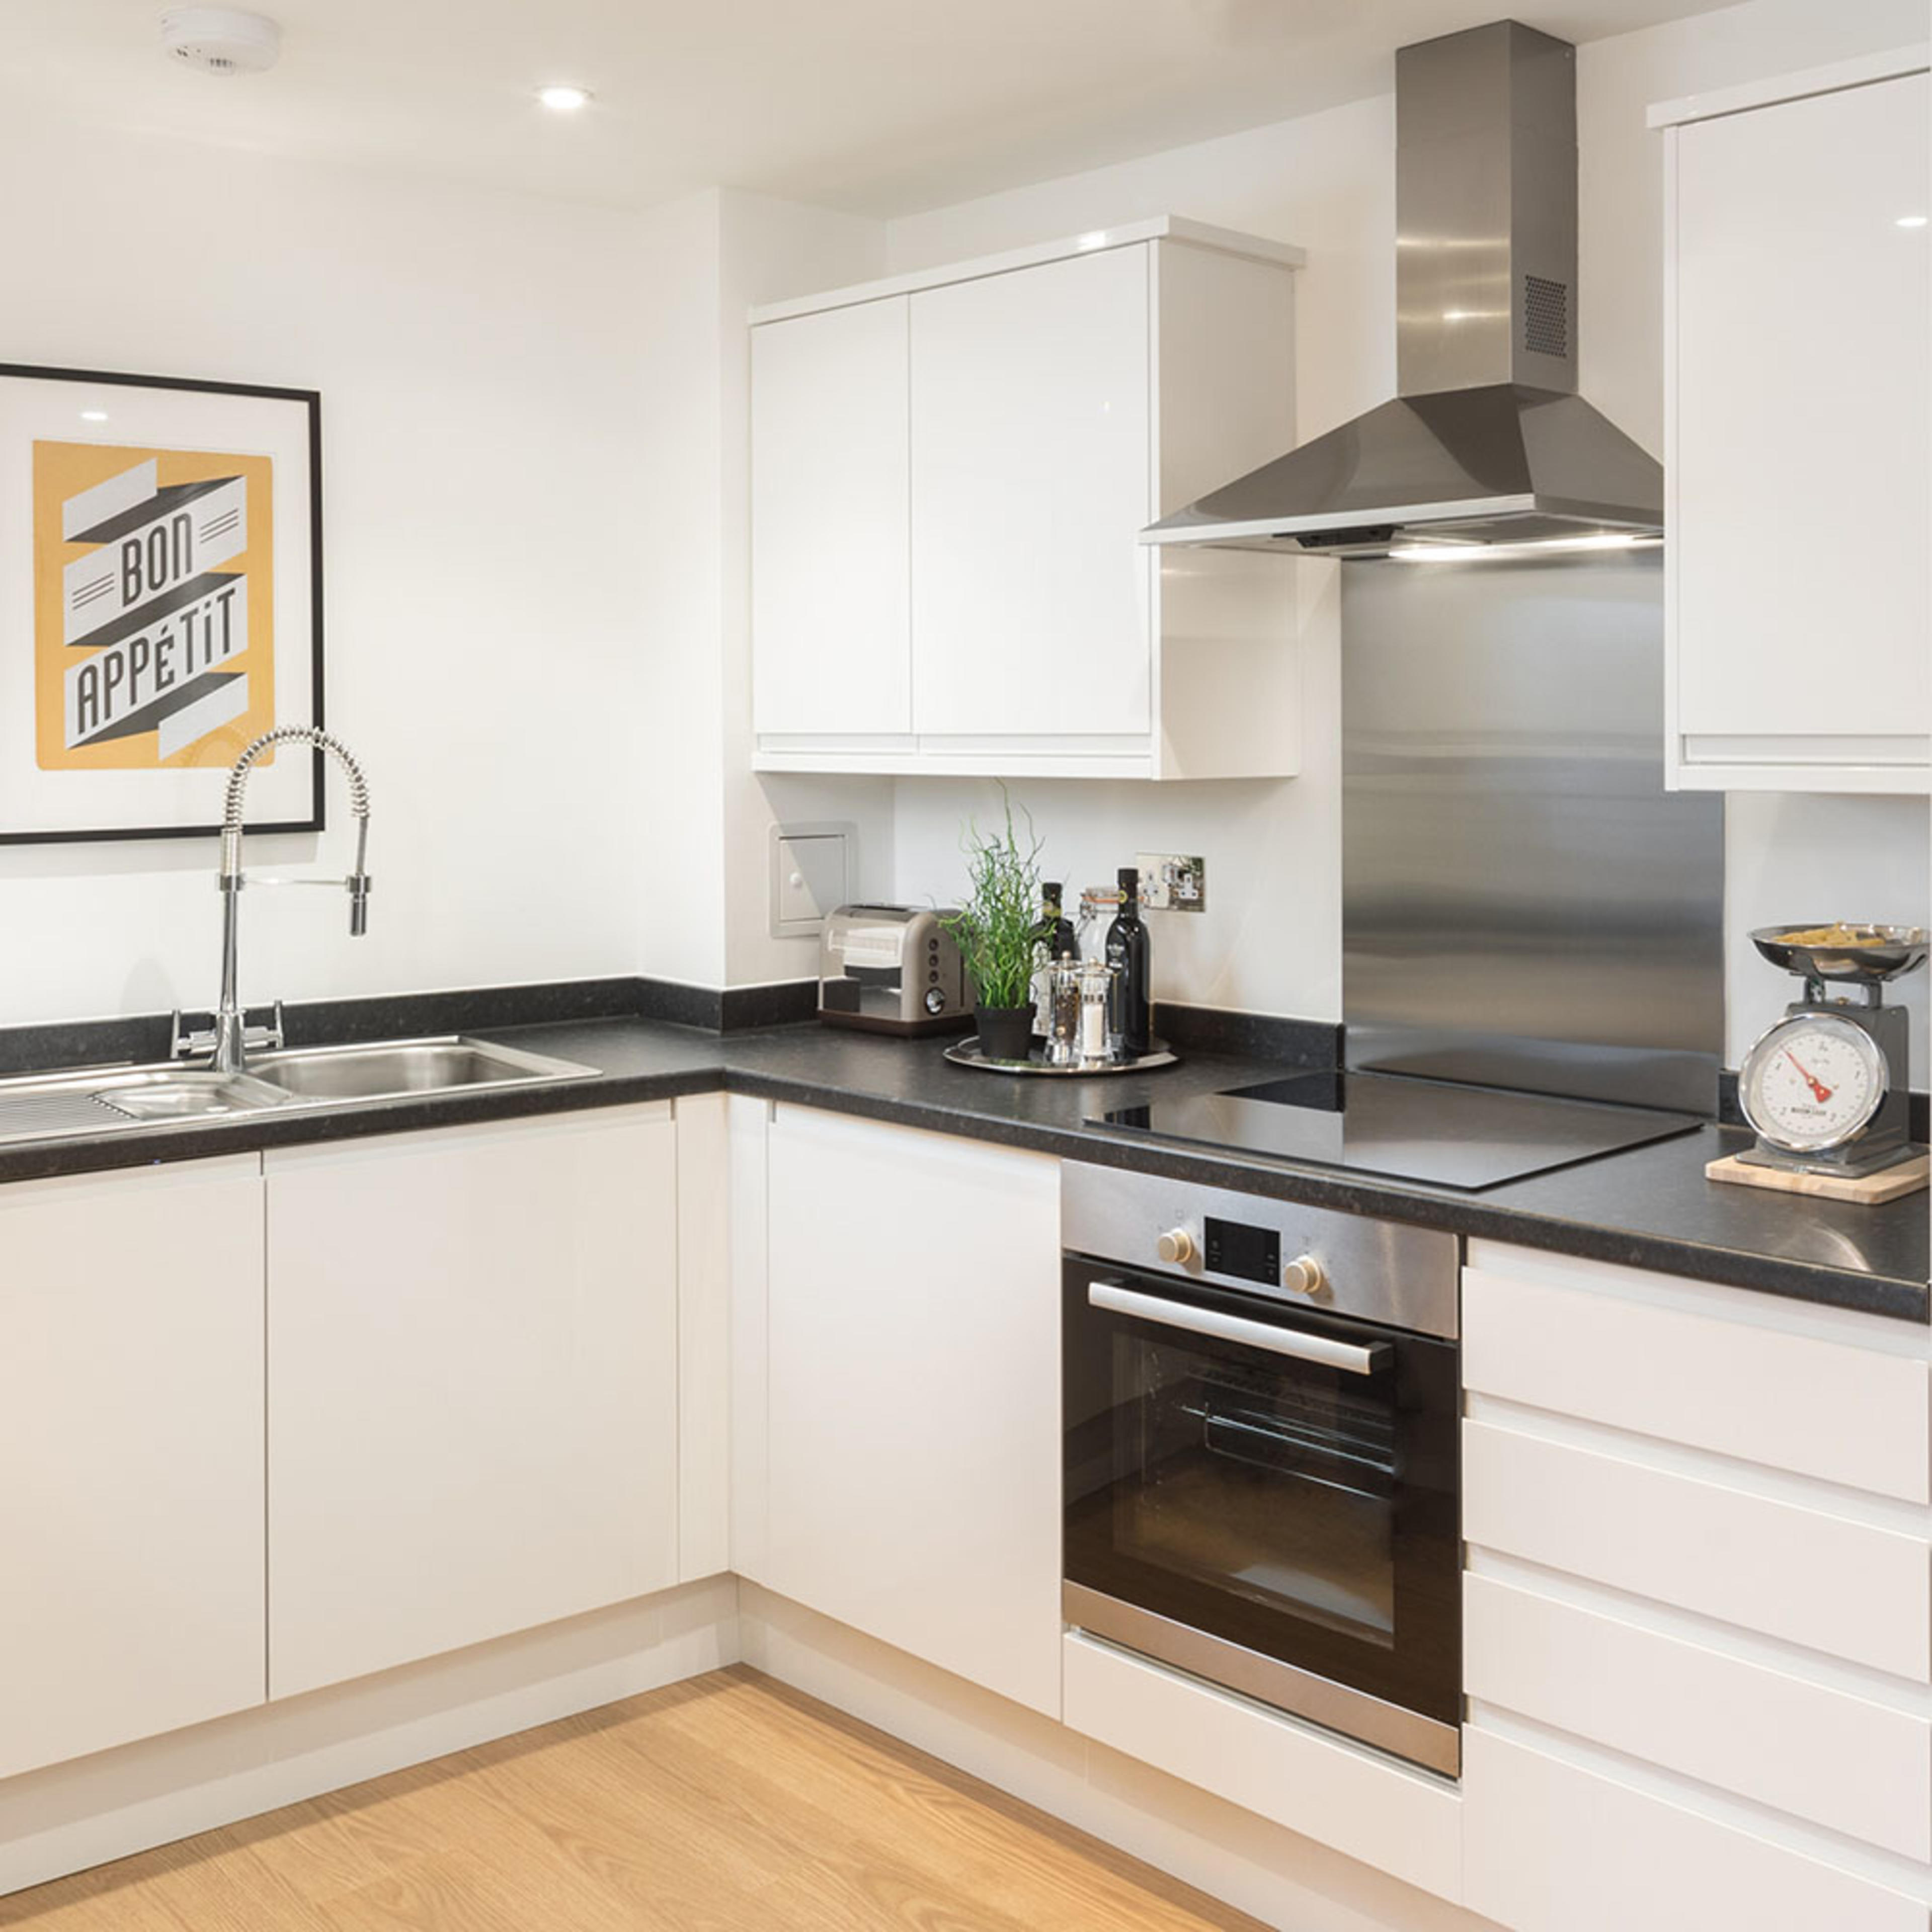 persona-homes-specification-kitchen-white-units-black-worktops-laminate-floor-unbranded-oven-steel hood-